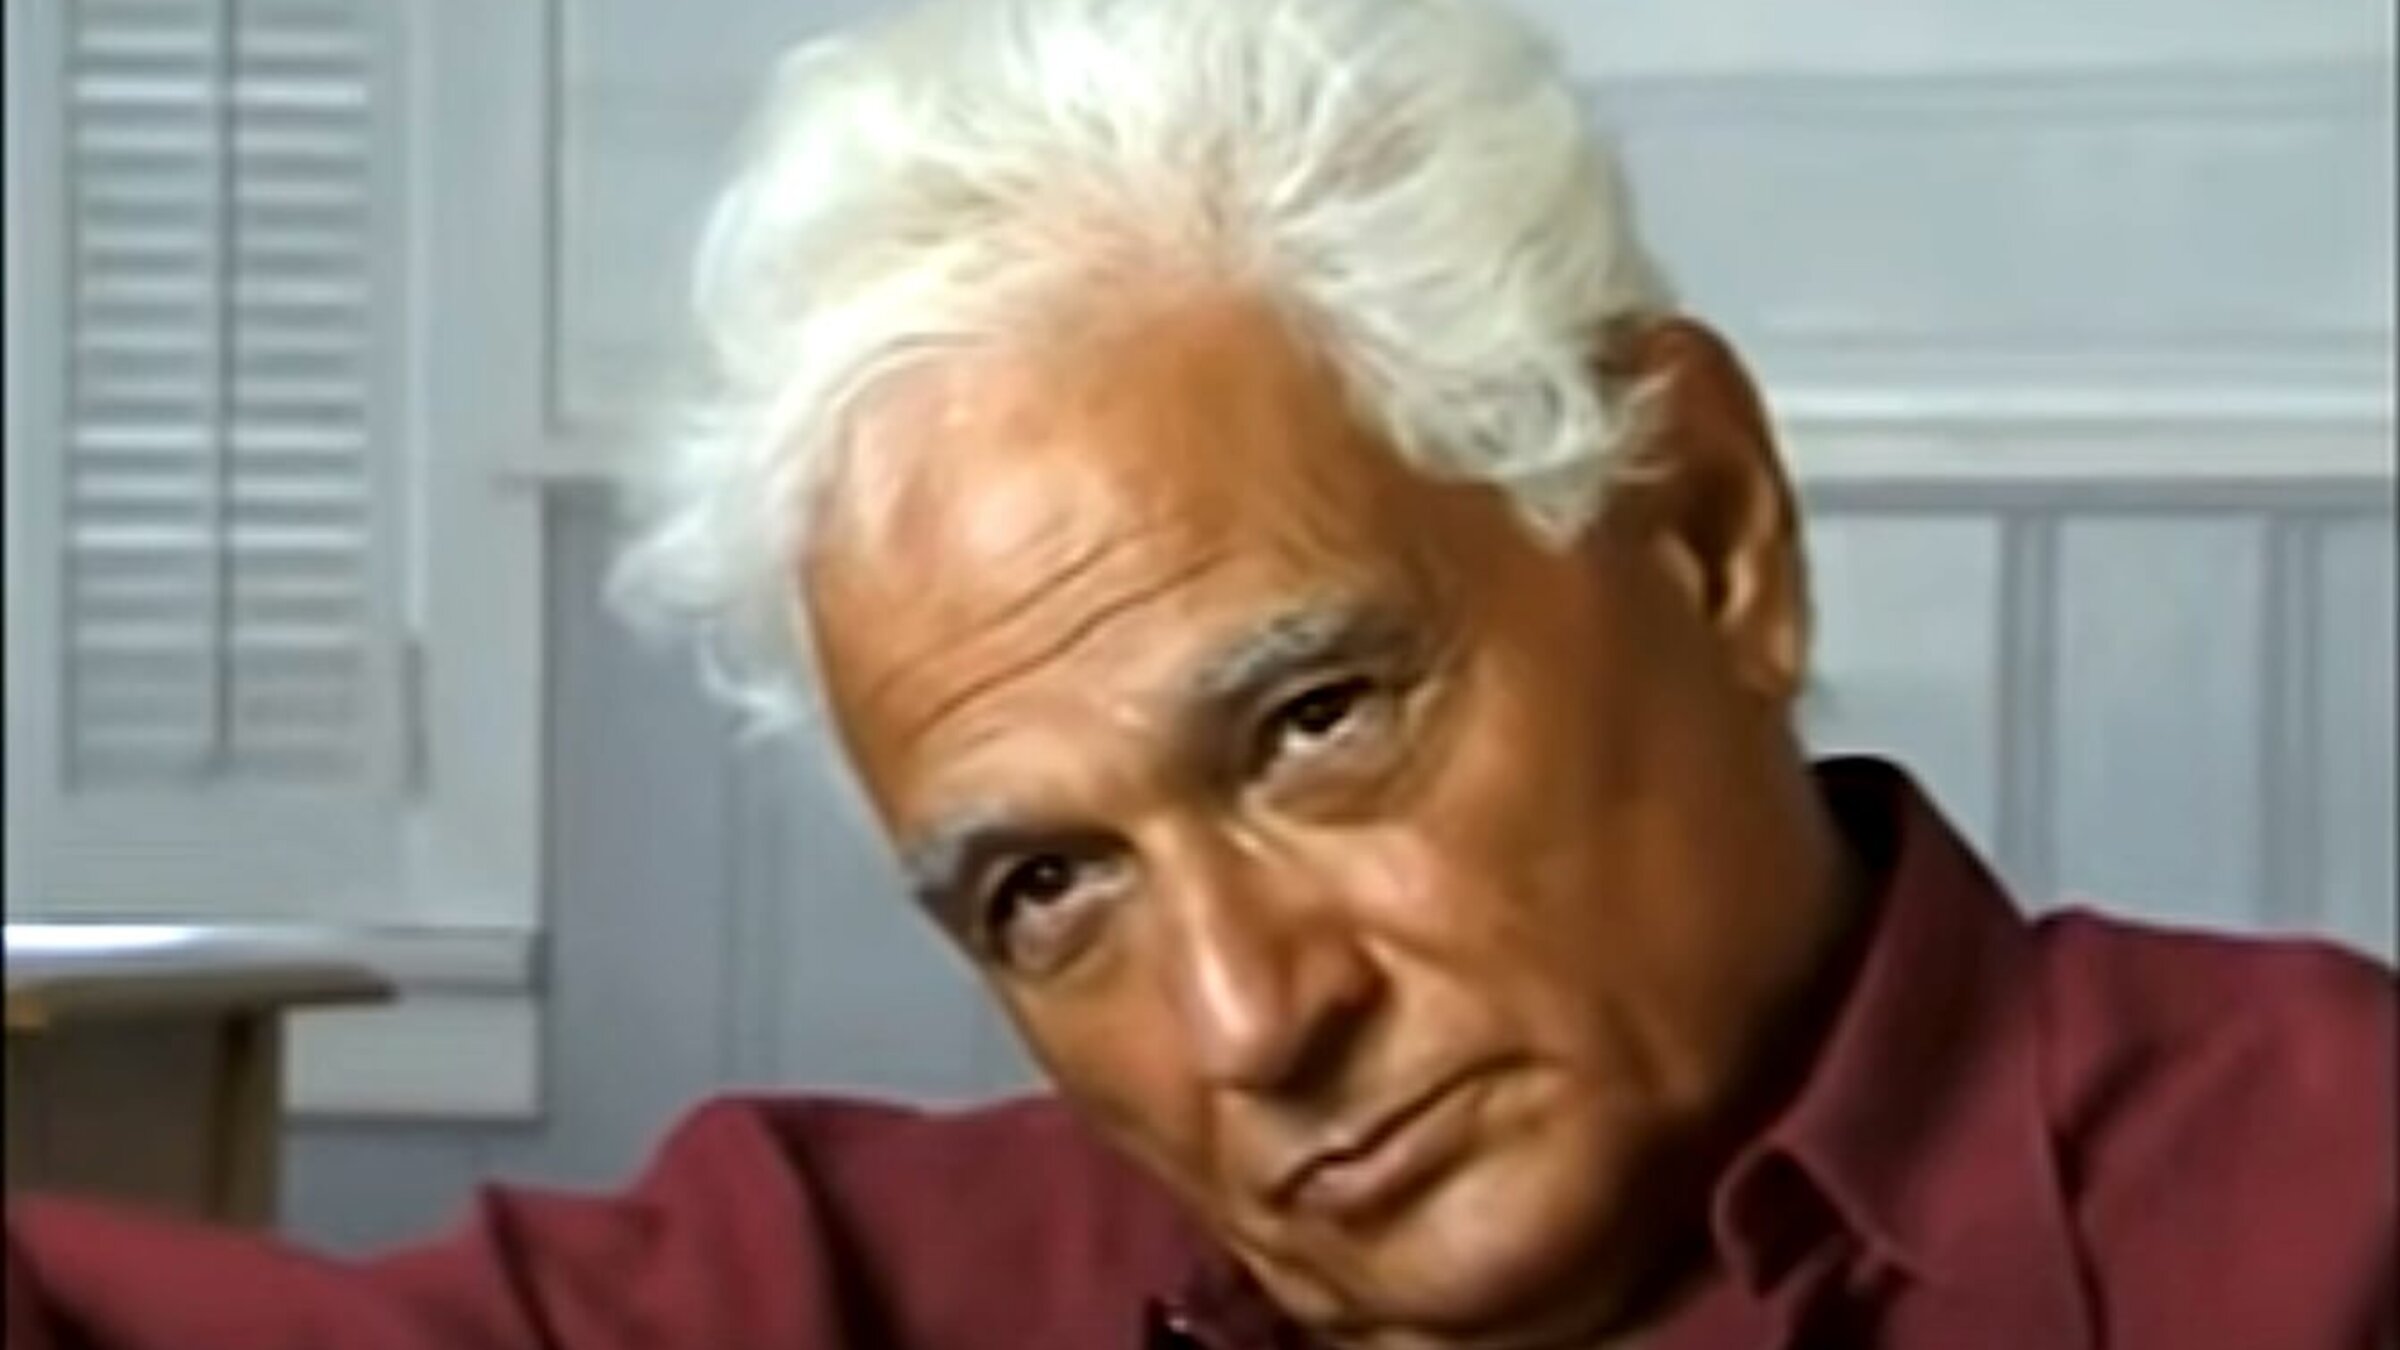 The French philosopher, Jaques Derrida